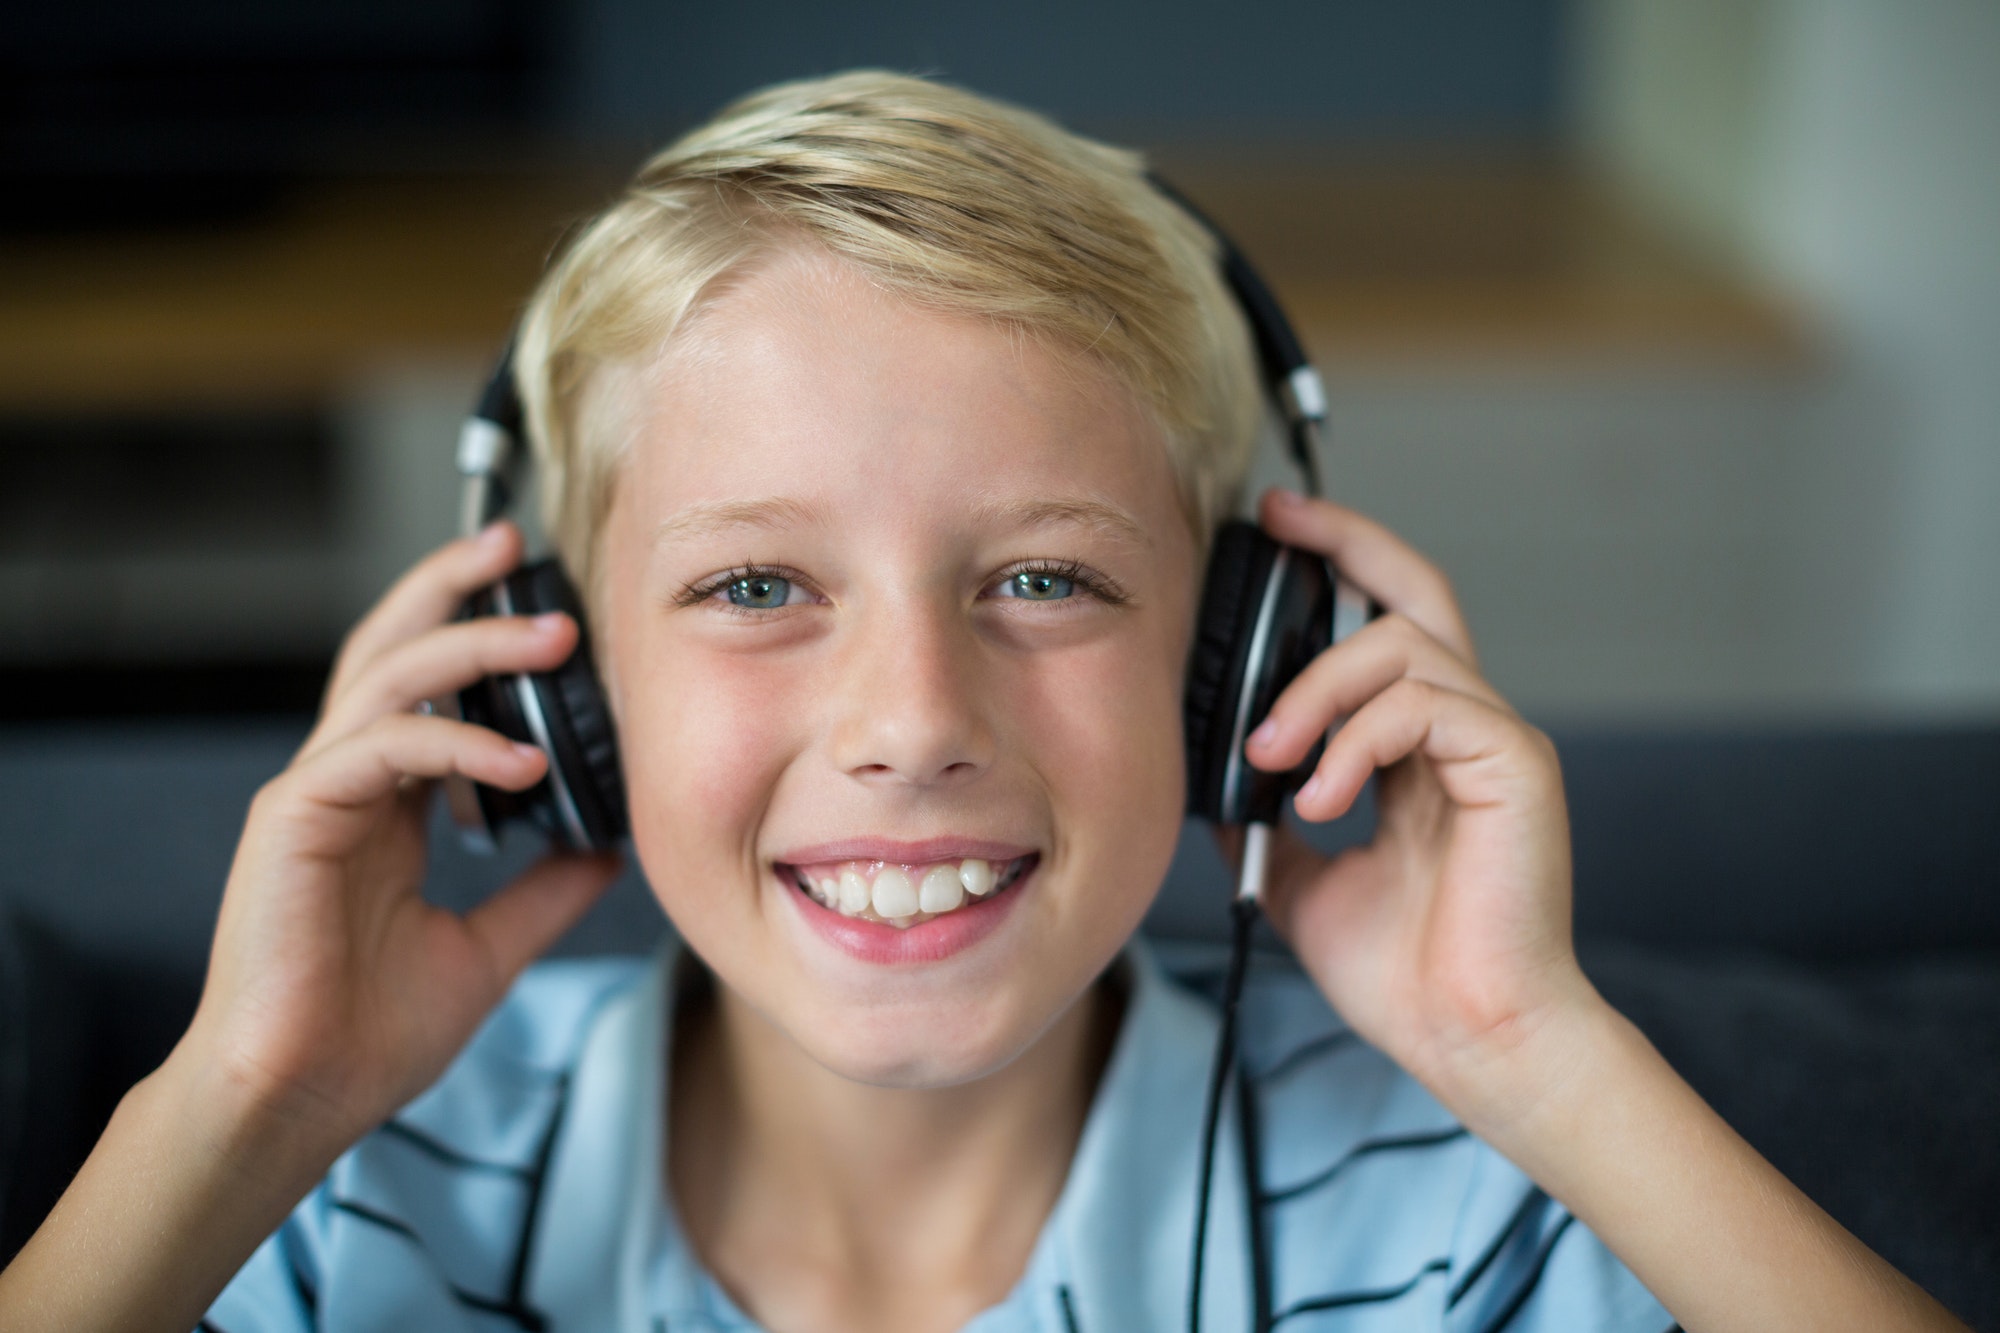 Smiling boy listening to music on headphones in living room